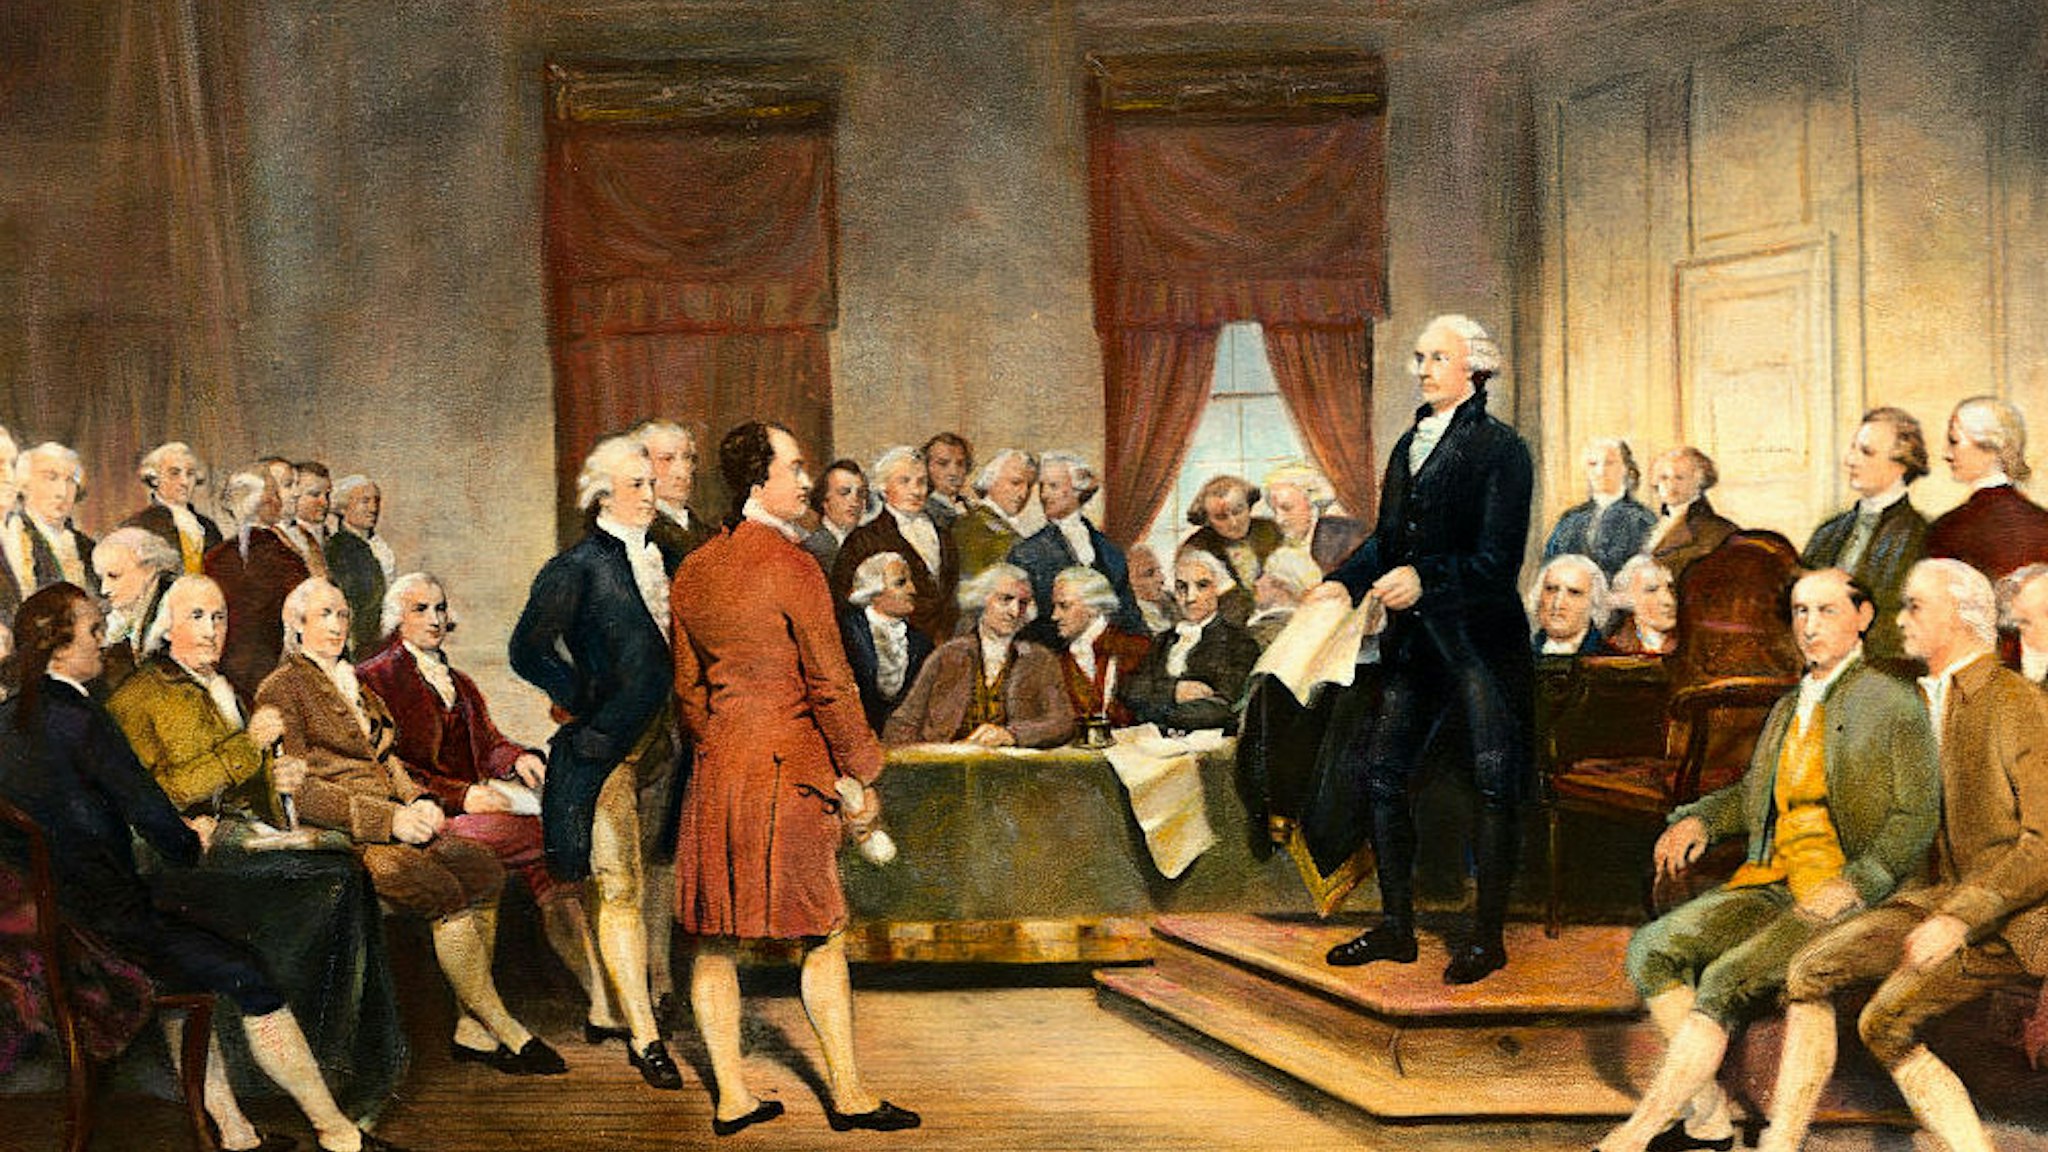 (Original Caption) The signing of the United States Constitution in 1787. Undated painting by Stearns.